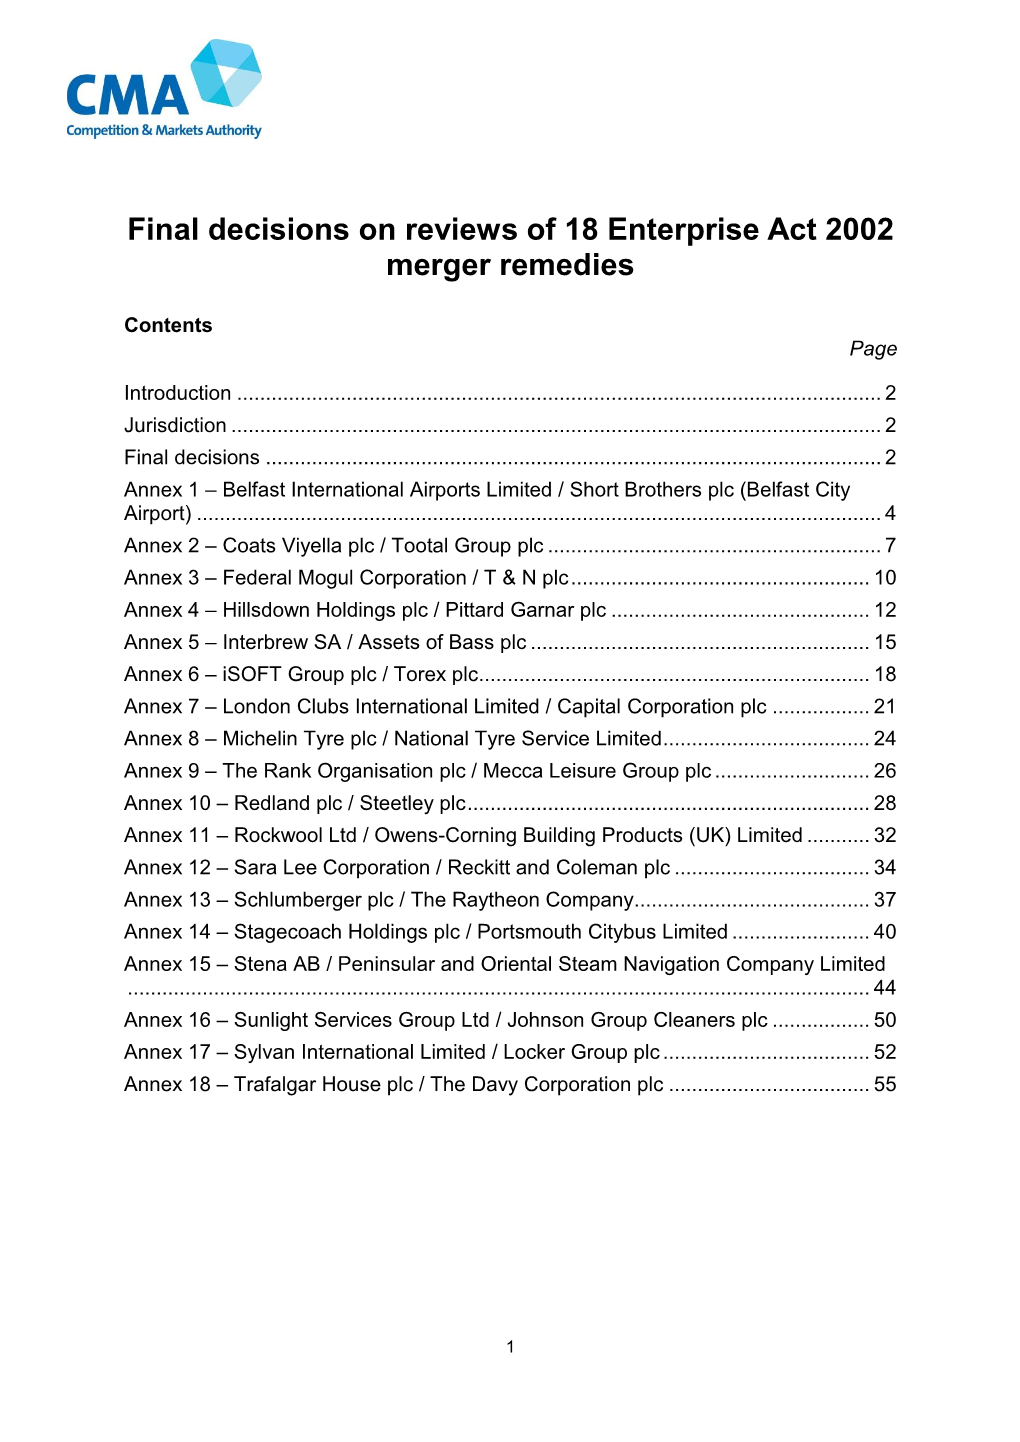 Final Decisions on Reviews of 18 Enterprise Act 2002 Merger Remedies